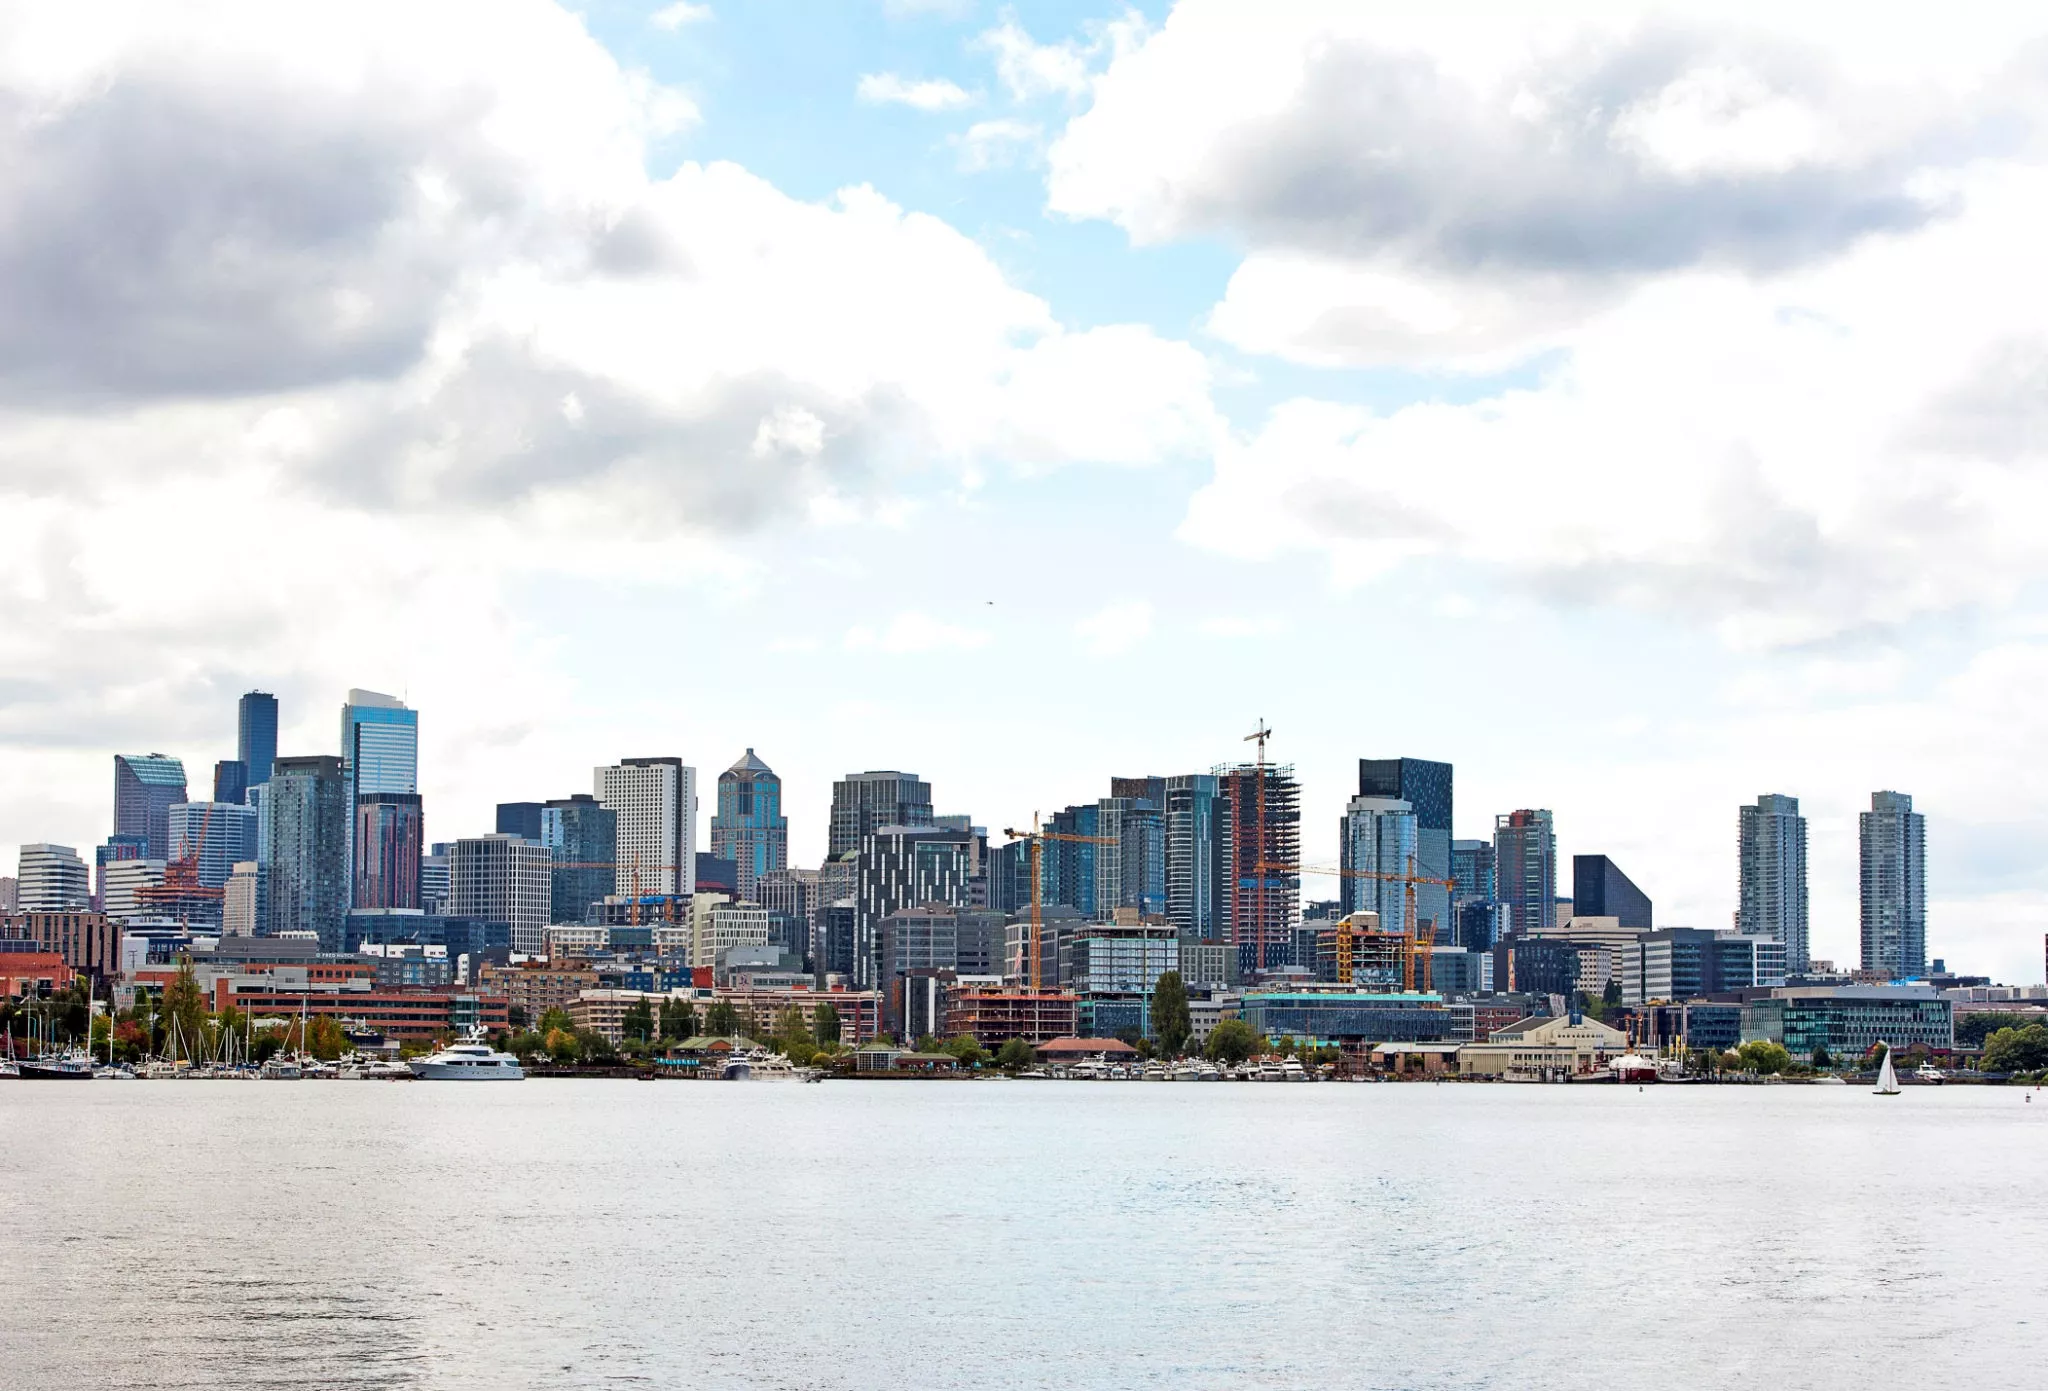 Lake Union in USA, North America | Lakes - Rated 3.8